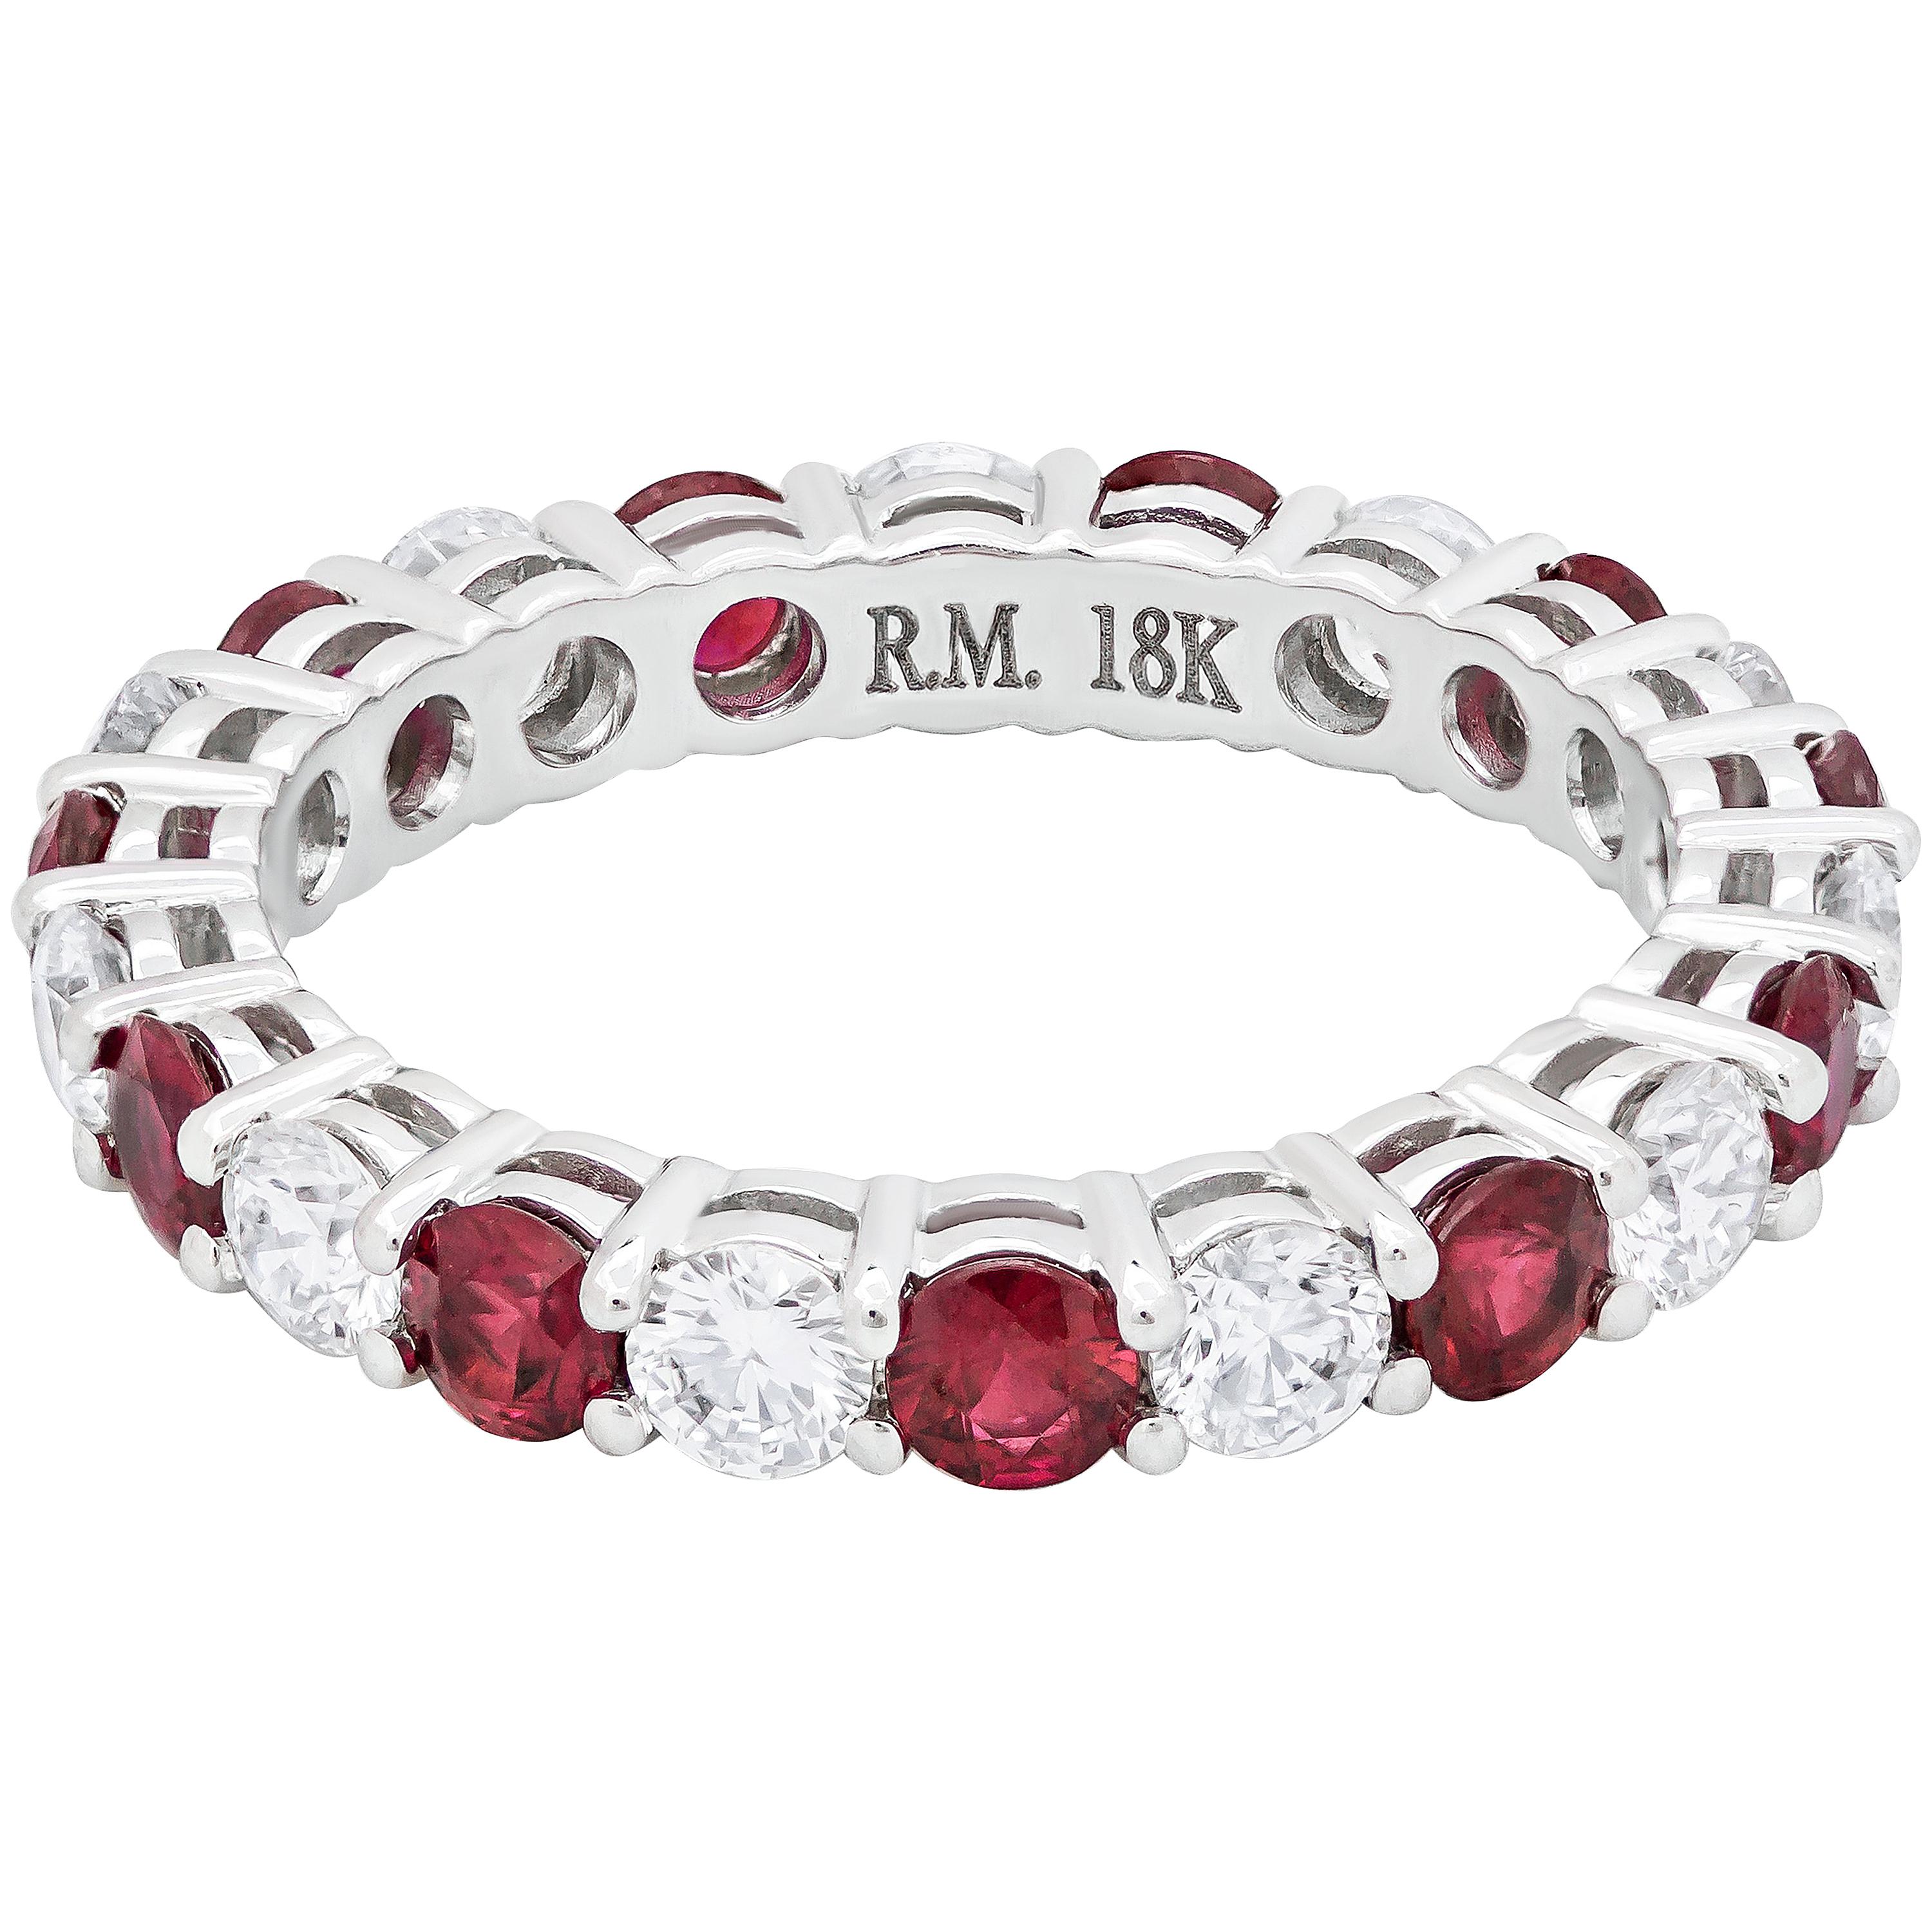 2.52 Carats Total Round Cut Alternating Ruby and Diamond Eternity Wedding Band